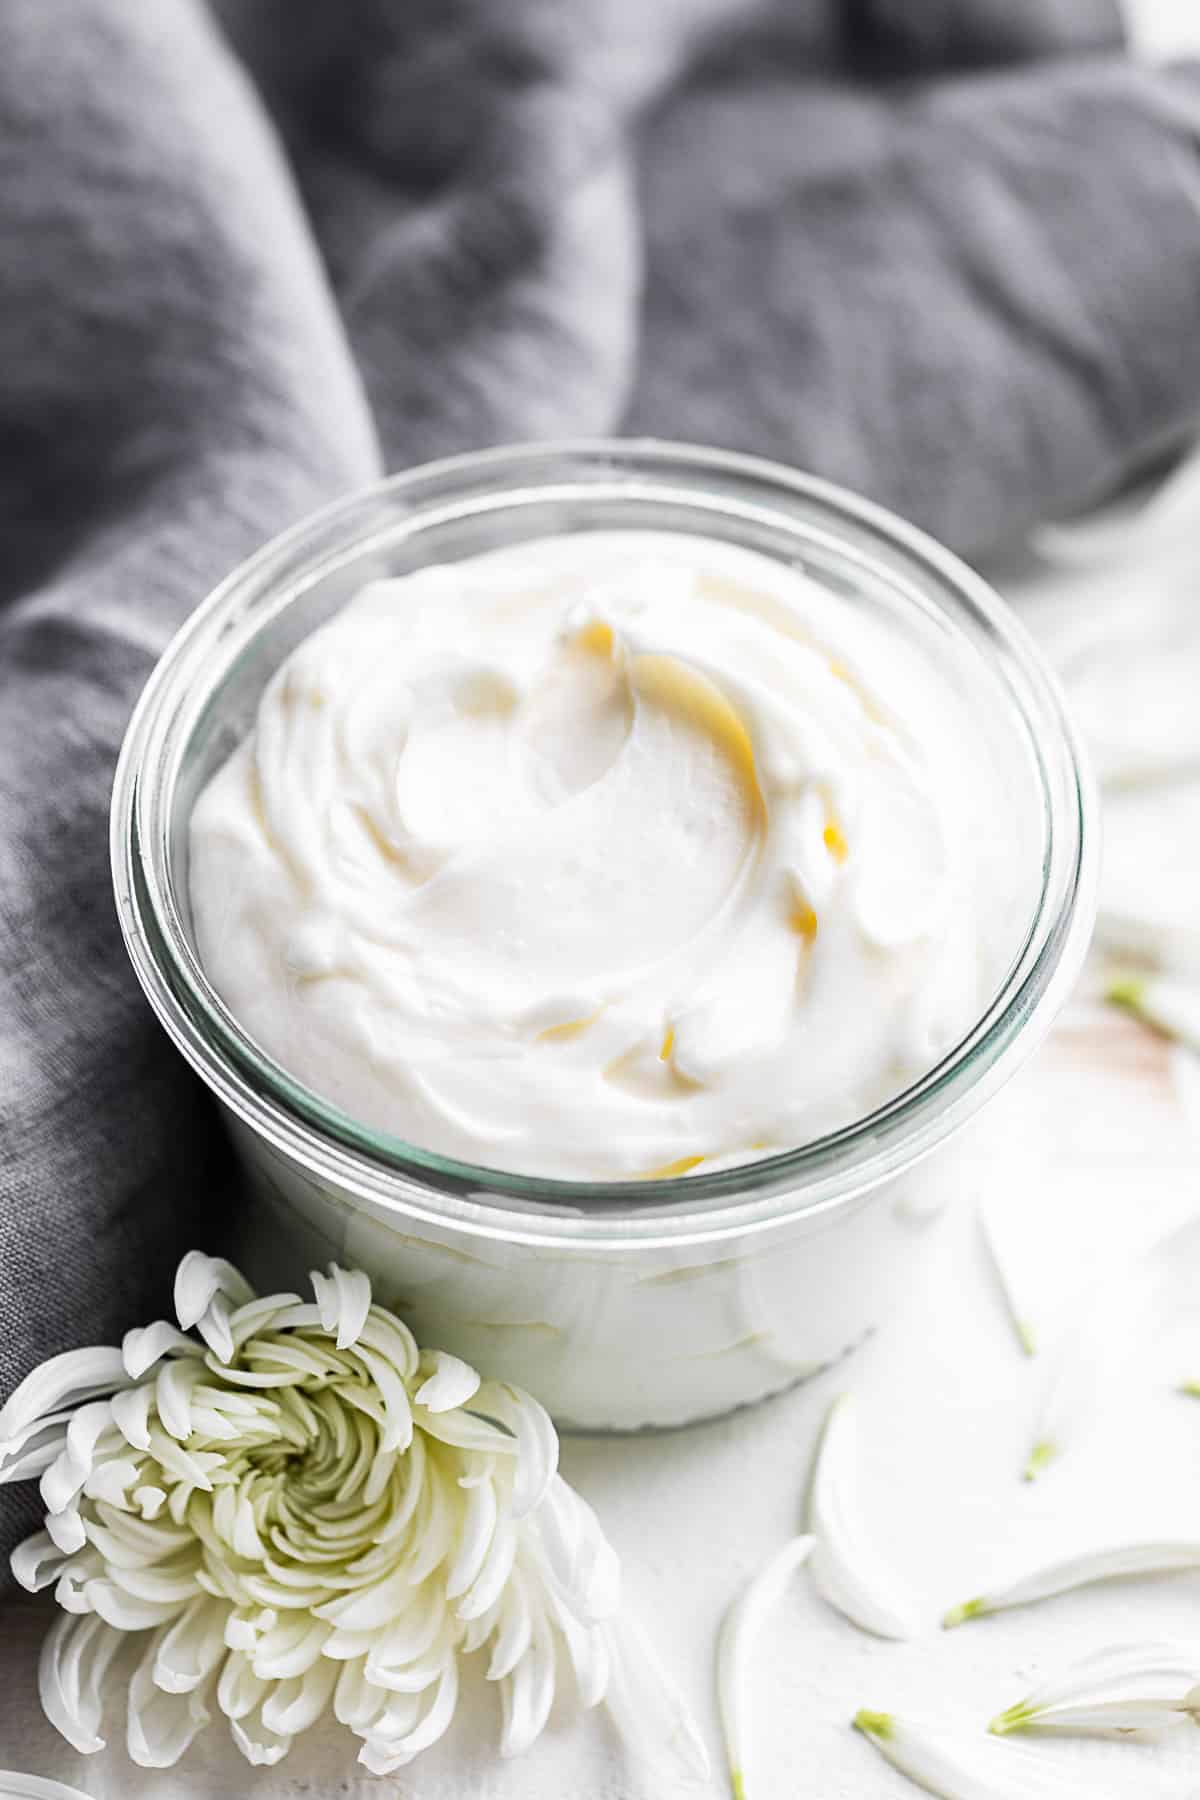 Whipped Body Butter in a glass jar with a white flower in front and petals around it.